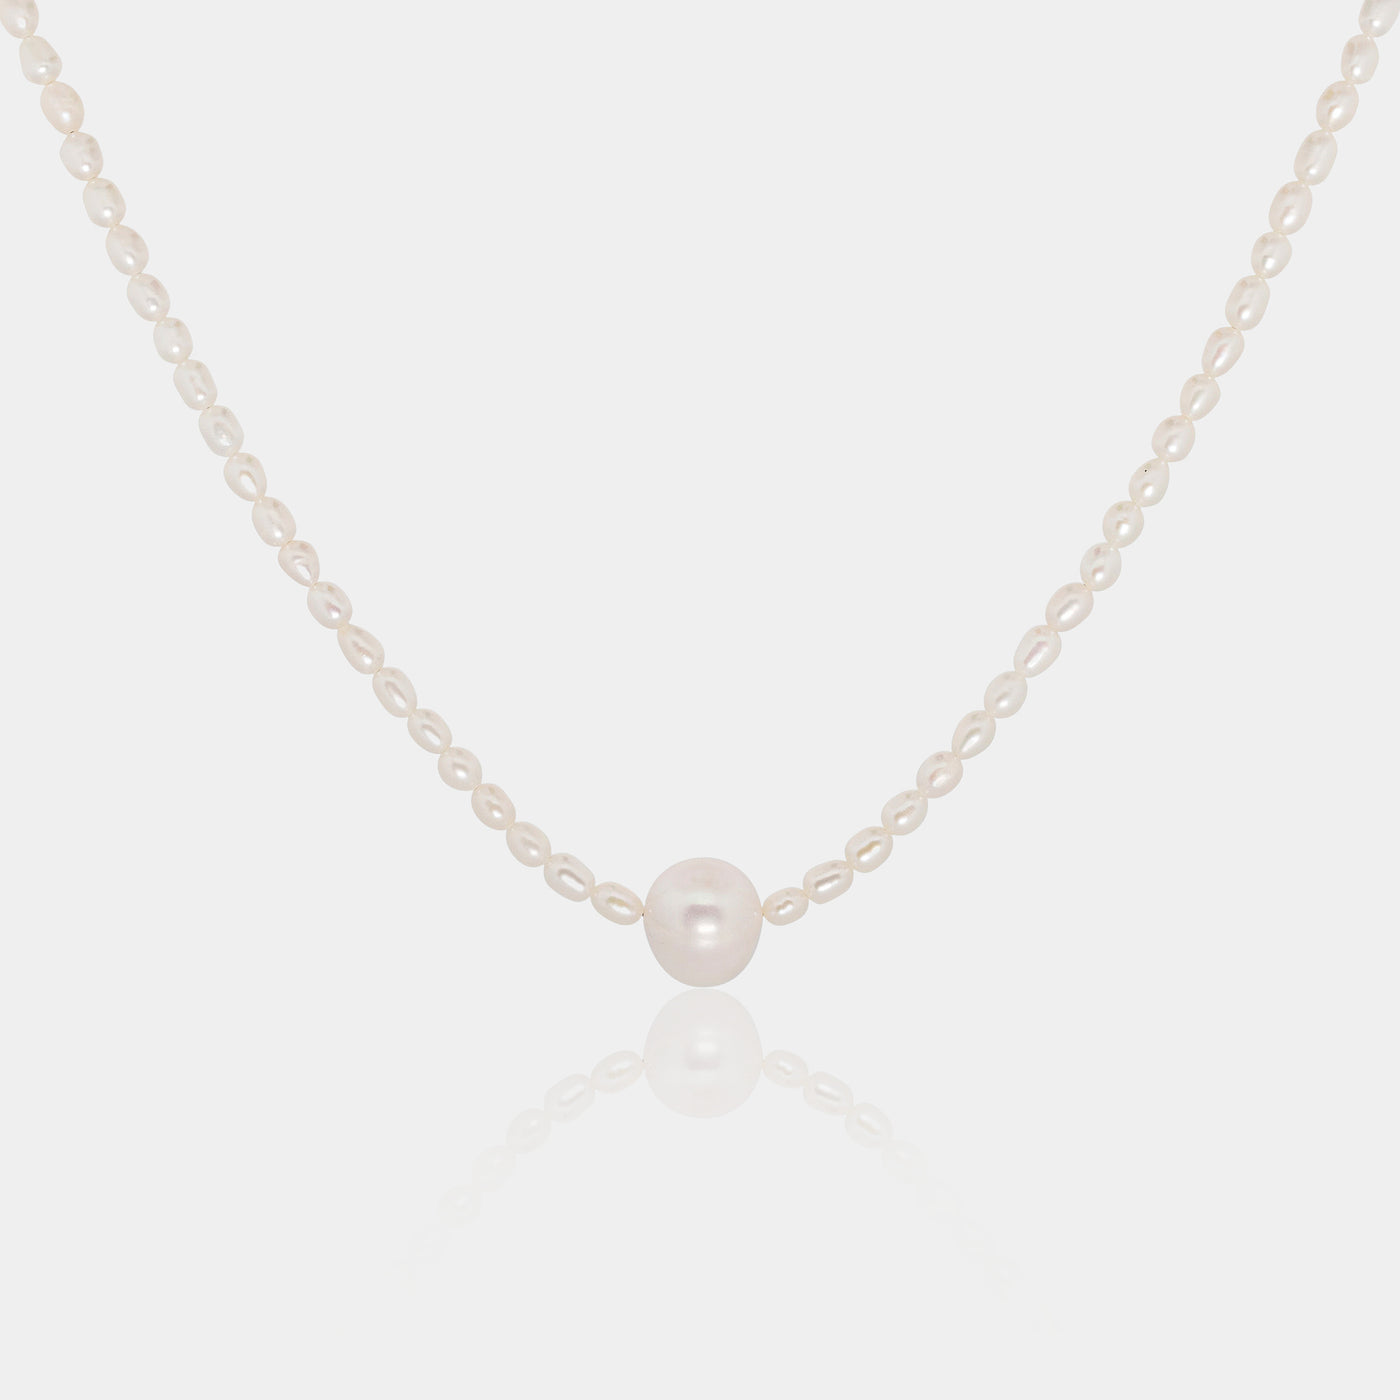 one-of-a-kind freshwater pearl centerpiece and luxurious 14k Gold-Filled findings pearl necklace